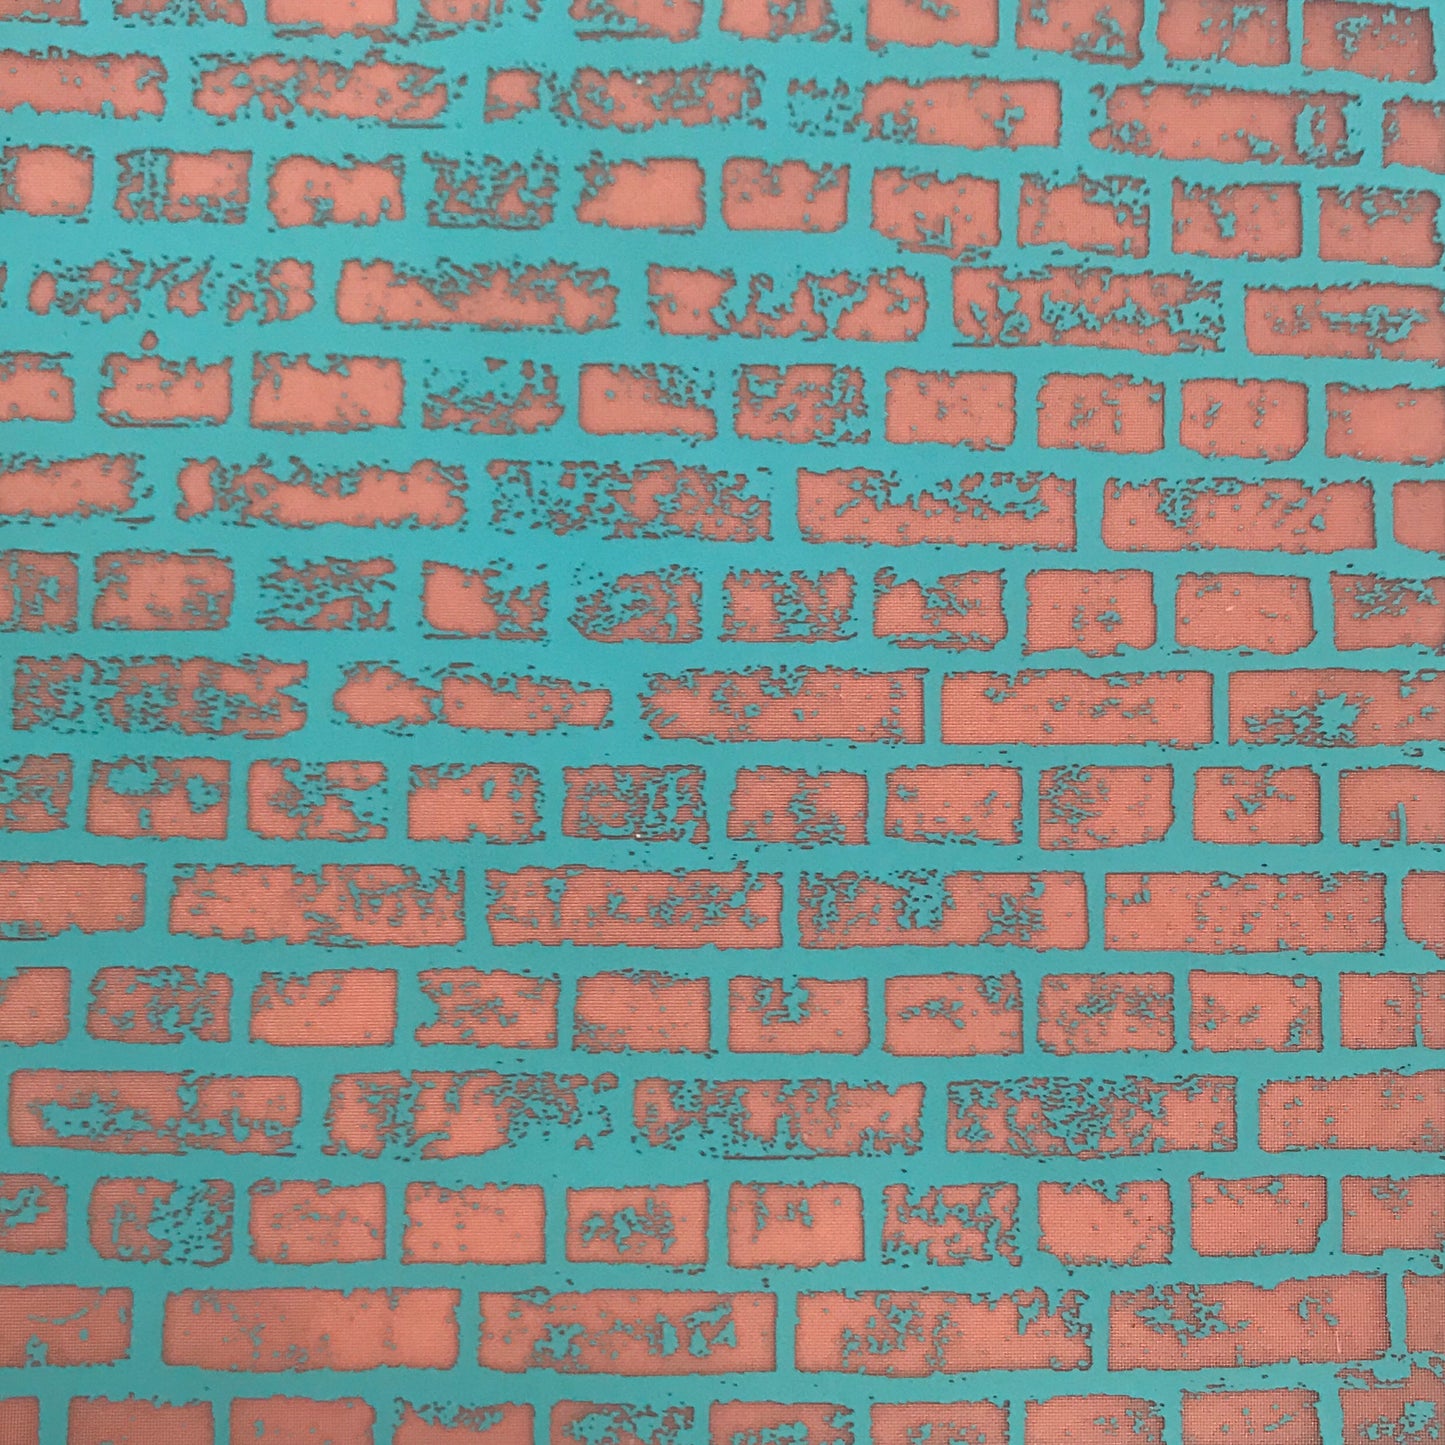 Silkscreen Brick Wall Stencil for Polymer Clay, Art Jewelry and Mixed Media